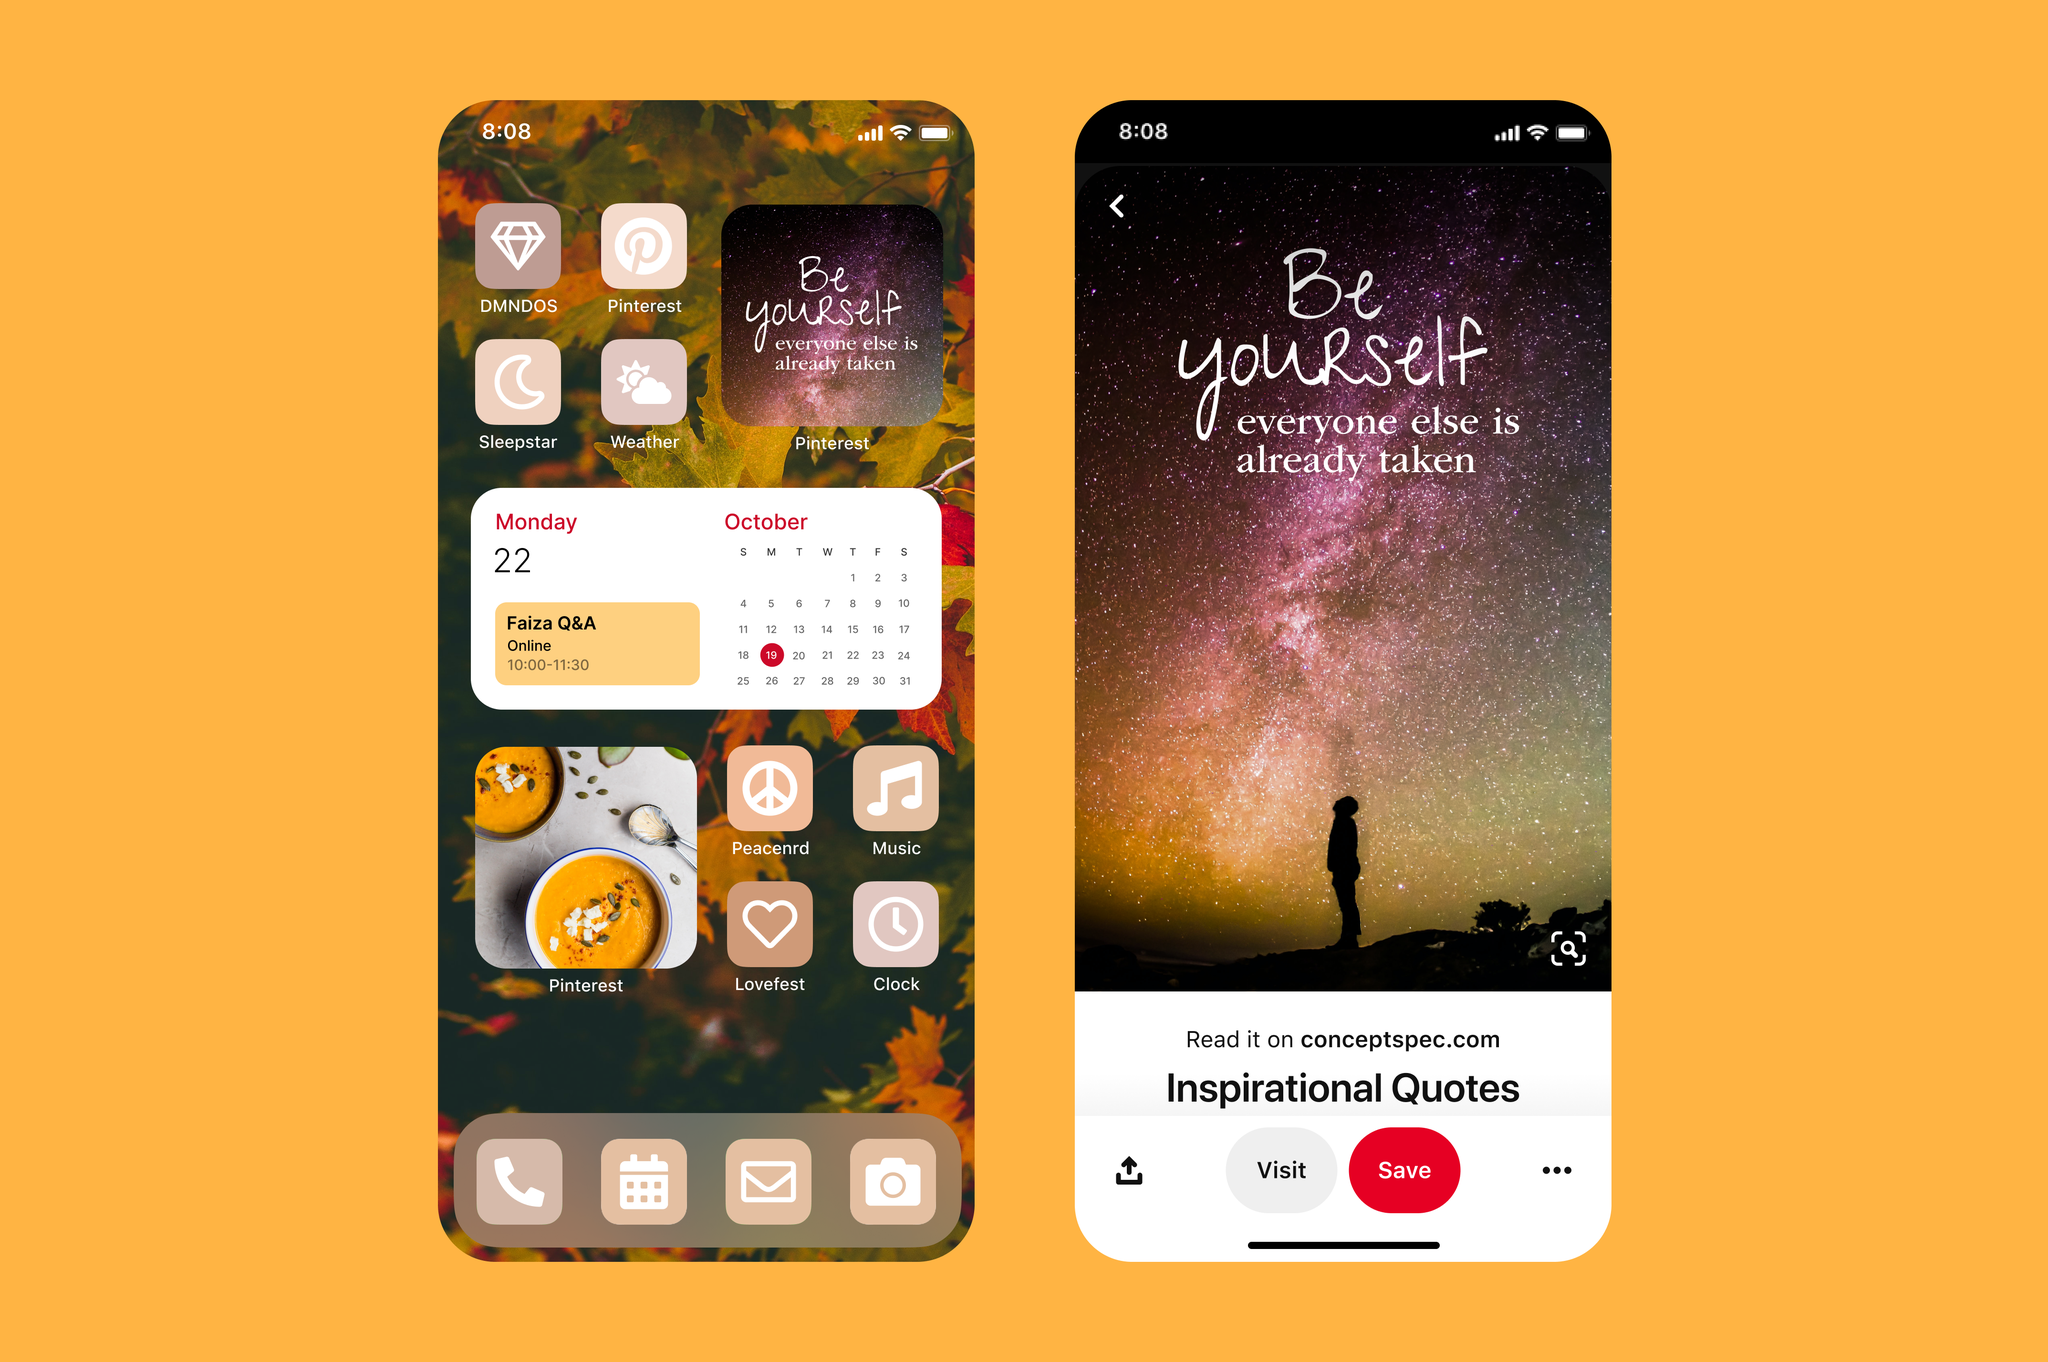 Pinterest launches a new widget for Pinners looking for iOS 14 home